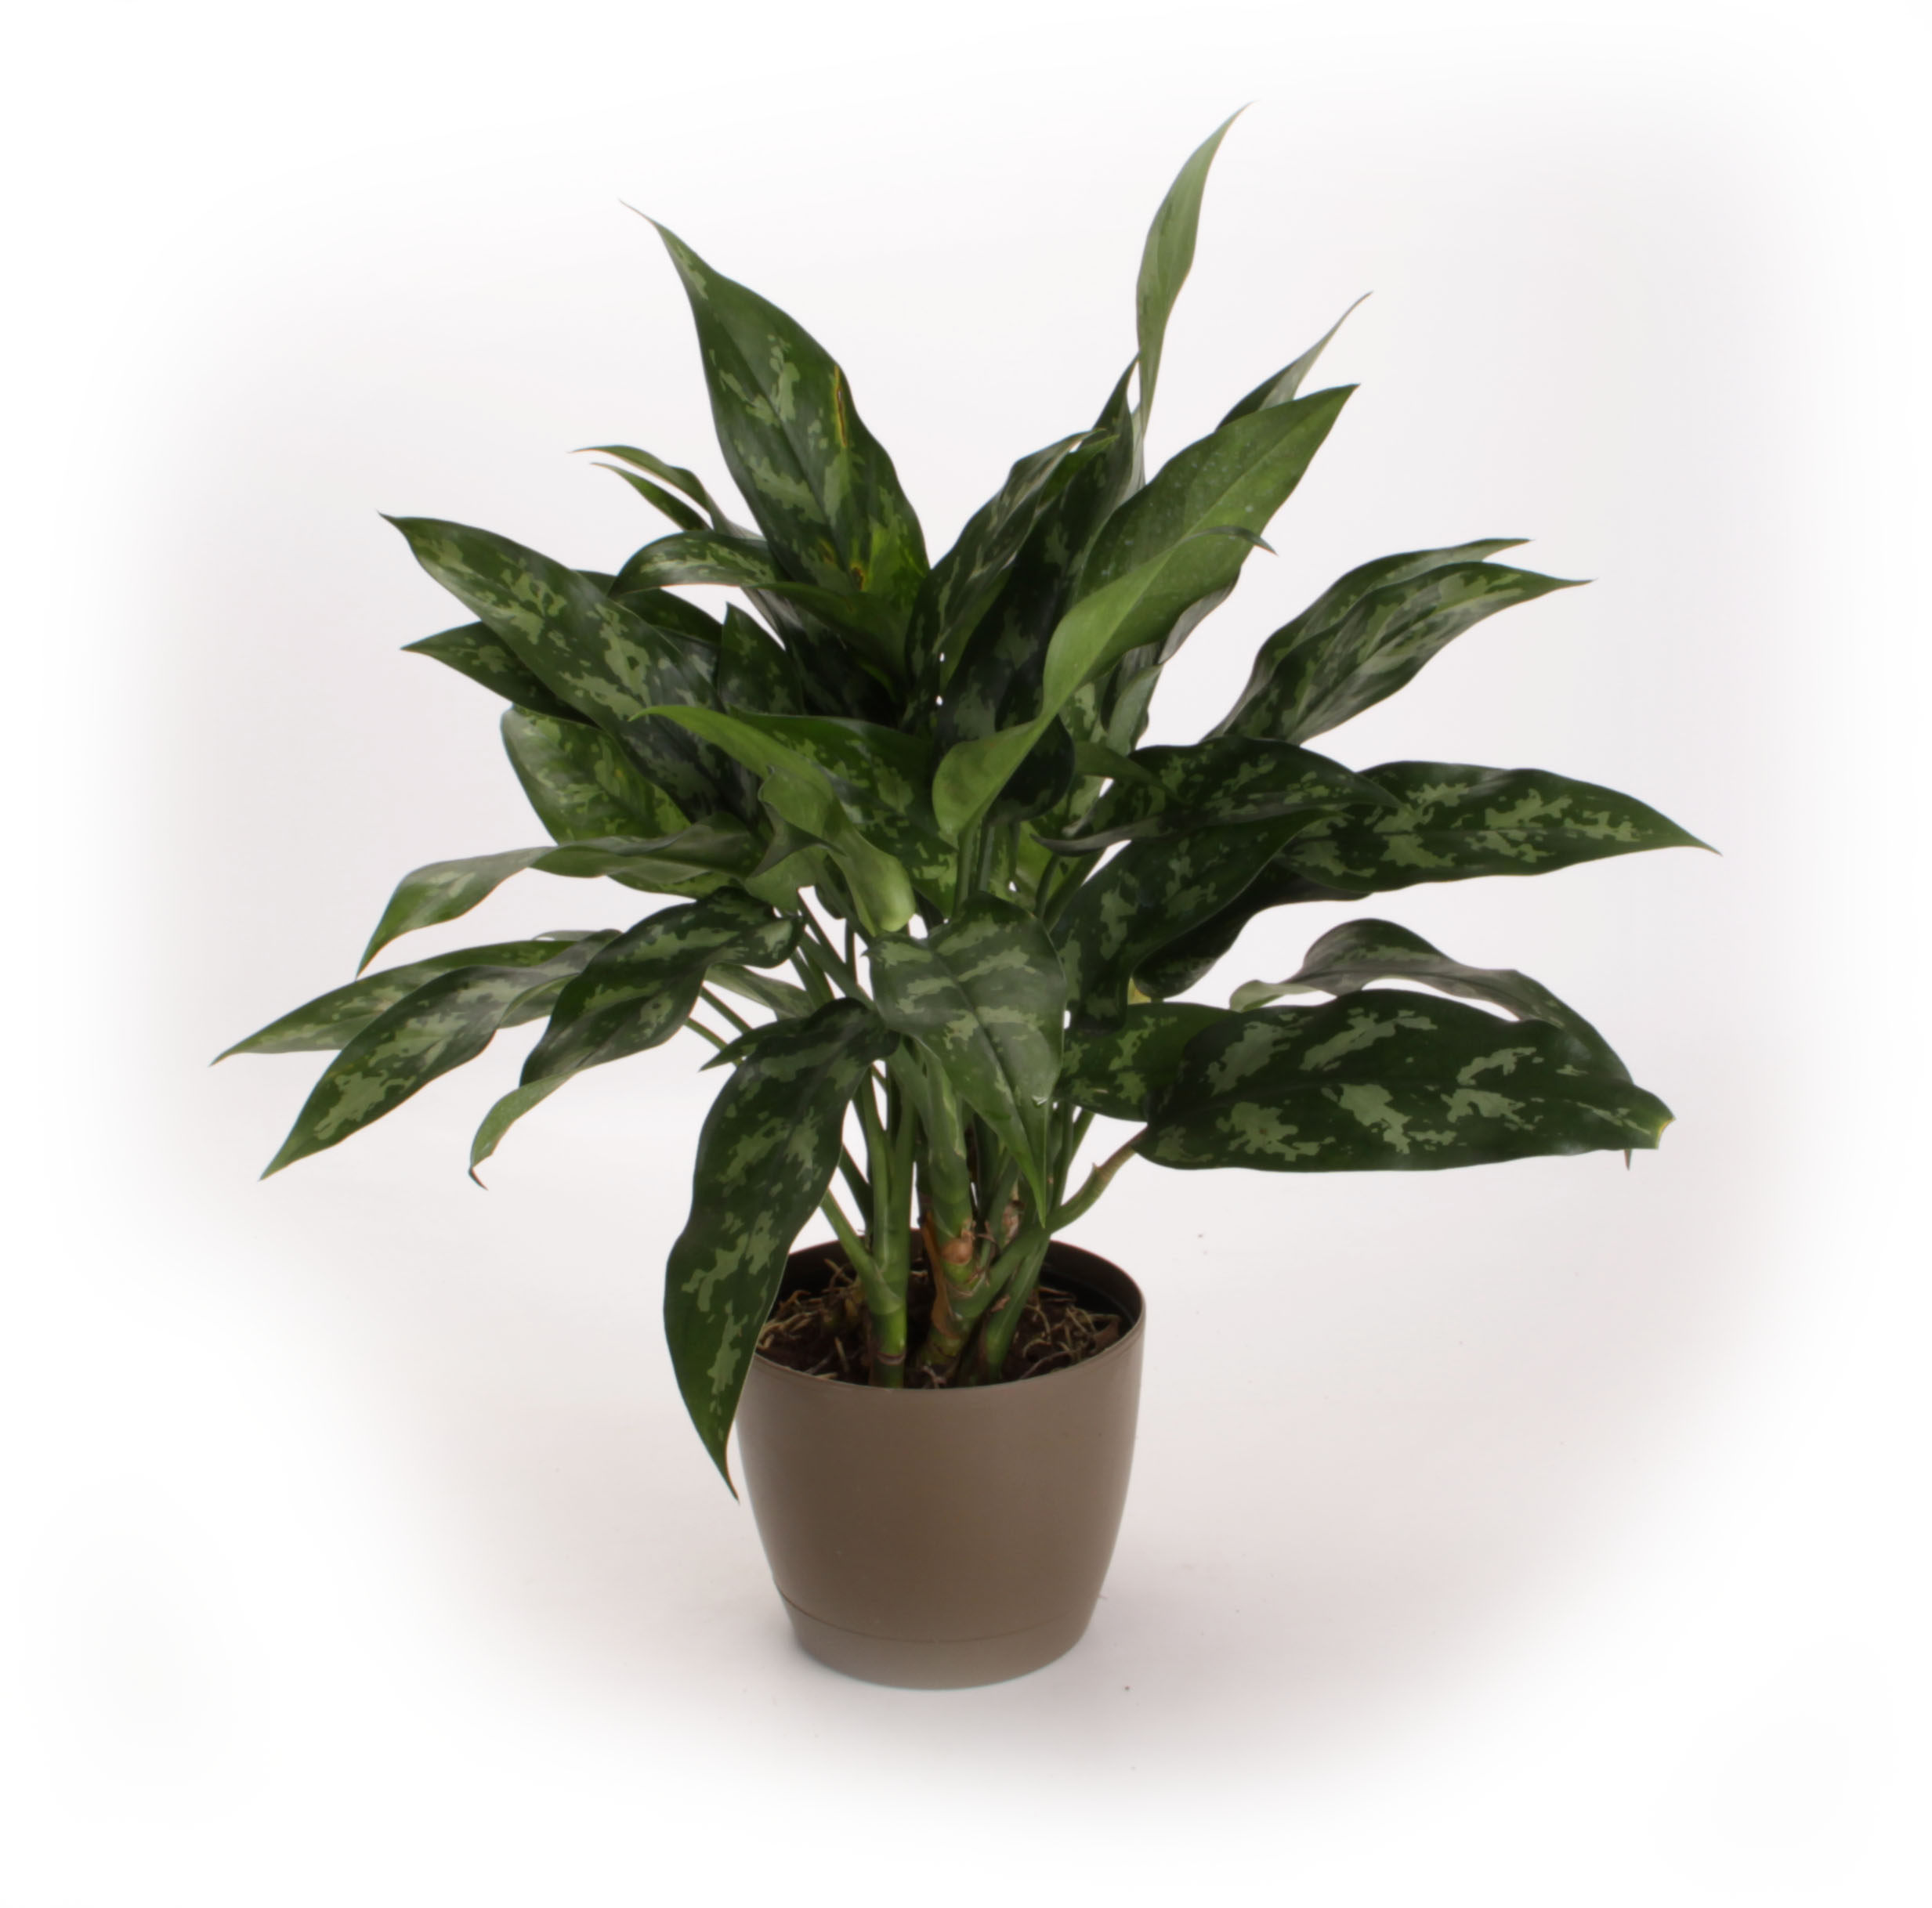 Chinese evergreen is one of the best plants for beginners to grow.